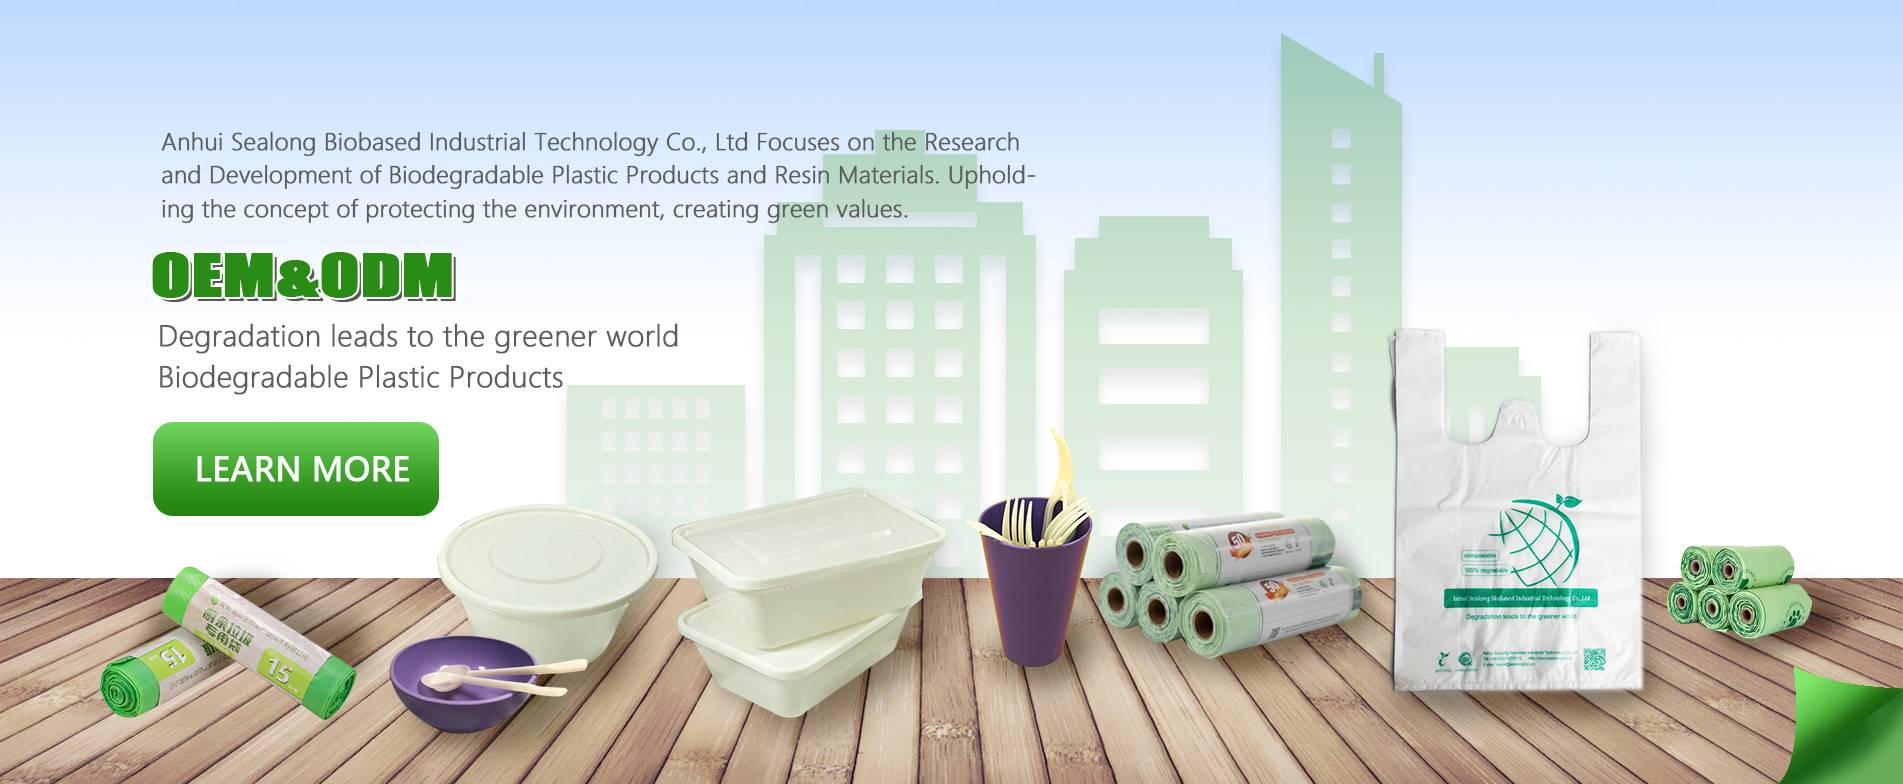 OEM & ODM Biodegradable Plastic Products